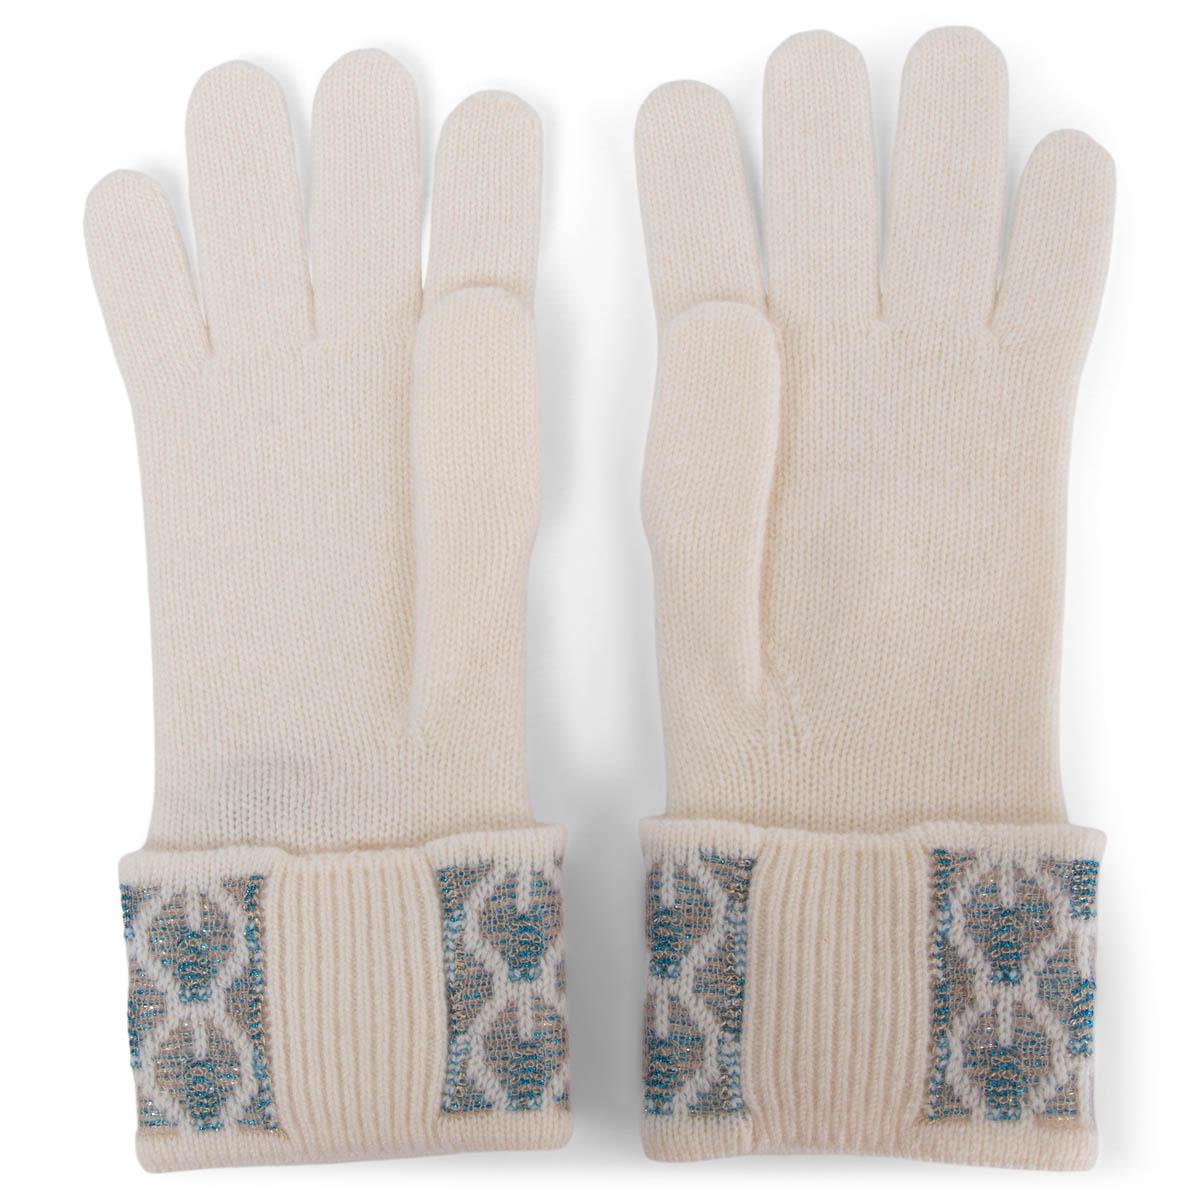 100% authentic Chanel CC gloves in off-white cashmere (95%), viscose (2%), cotton (1%) and bue metallised fibre (1%). Have been worn and are in excellent condition. 

Measurements
Middle Finger to Wrist	27cm (10.5in)
Middle Finger	7cm